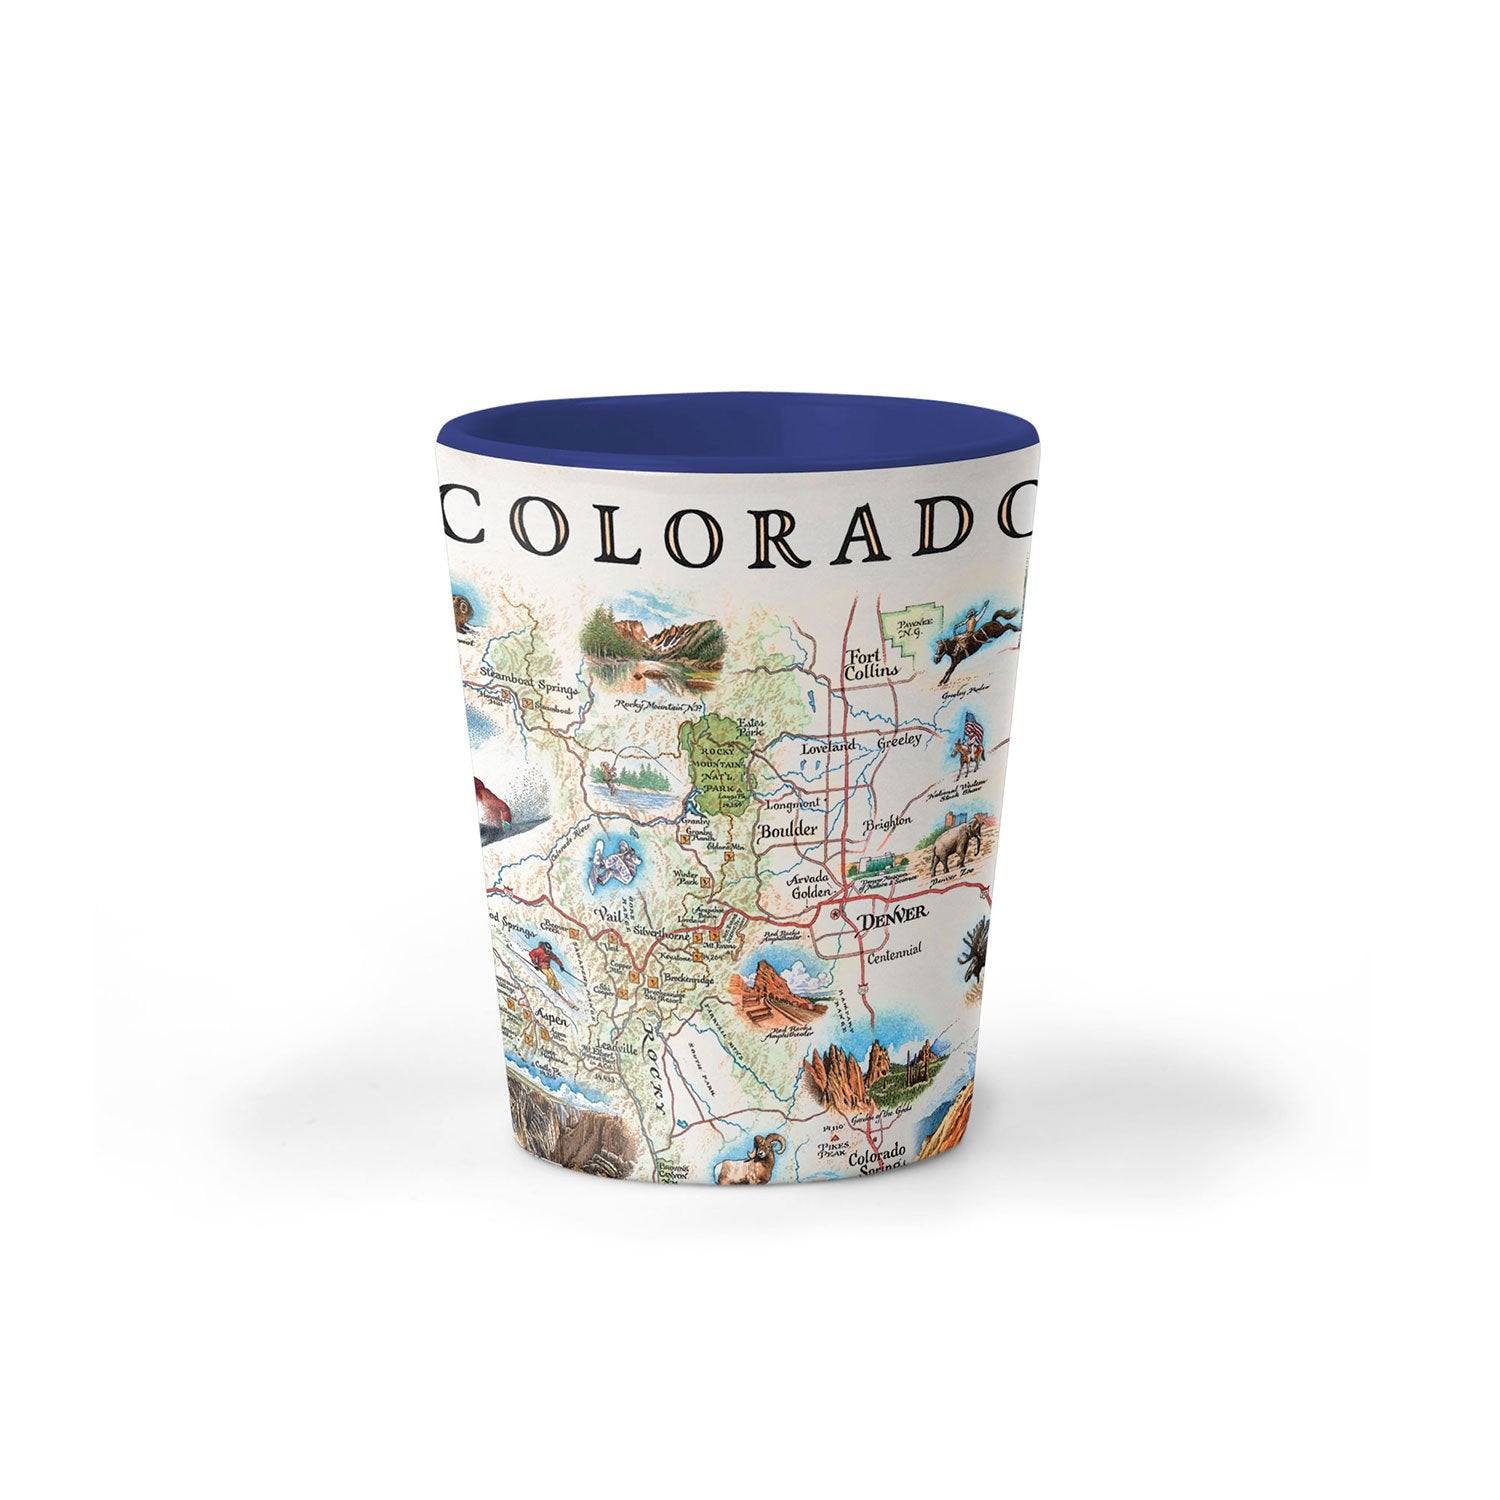 Colorado Map Ceramic shot glass showcases various cities including Denver, Fort Collins, Colorado Springs, Aspen, and Durango. It also features local flora and fauna, such as moose, Rocky Mountain elk, turtles, eagles, and Bighorn Sheep, as well as the indigenous Navajo and Hopi peoples. The map highlights popular activities like hiking, biking, rafting, and skiing. 